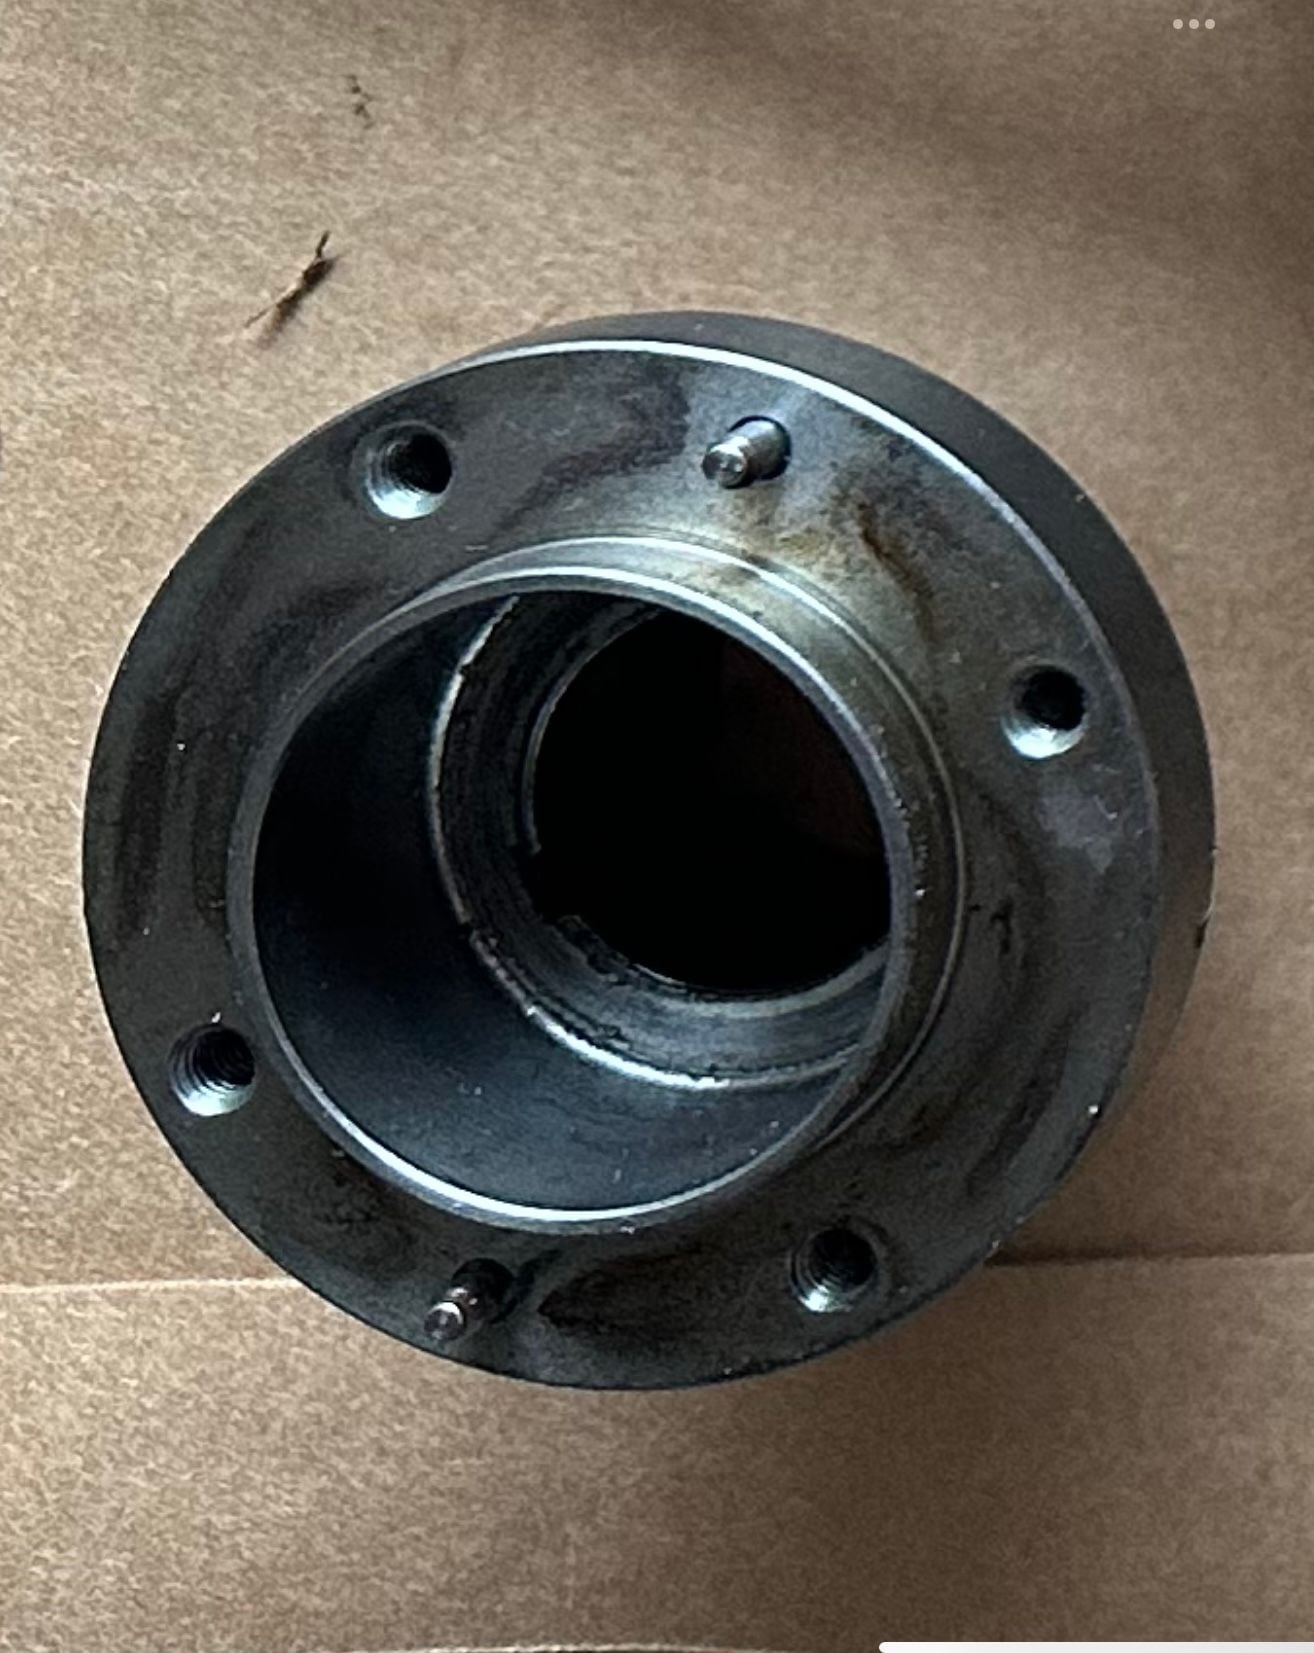 1994 Mazda RX-7 - Front Pulley - Miscellaneous - $50 - Palmdale, CA 93551, United States